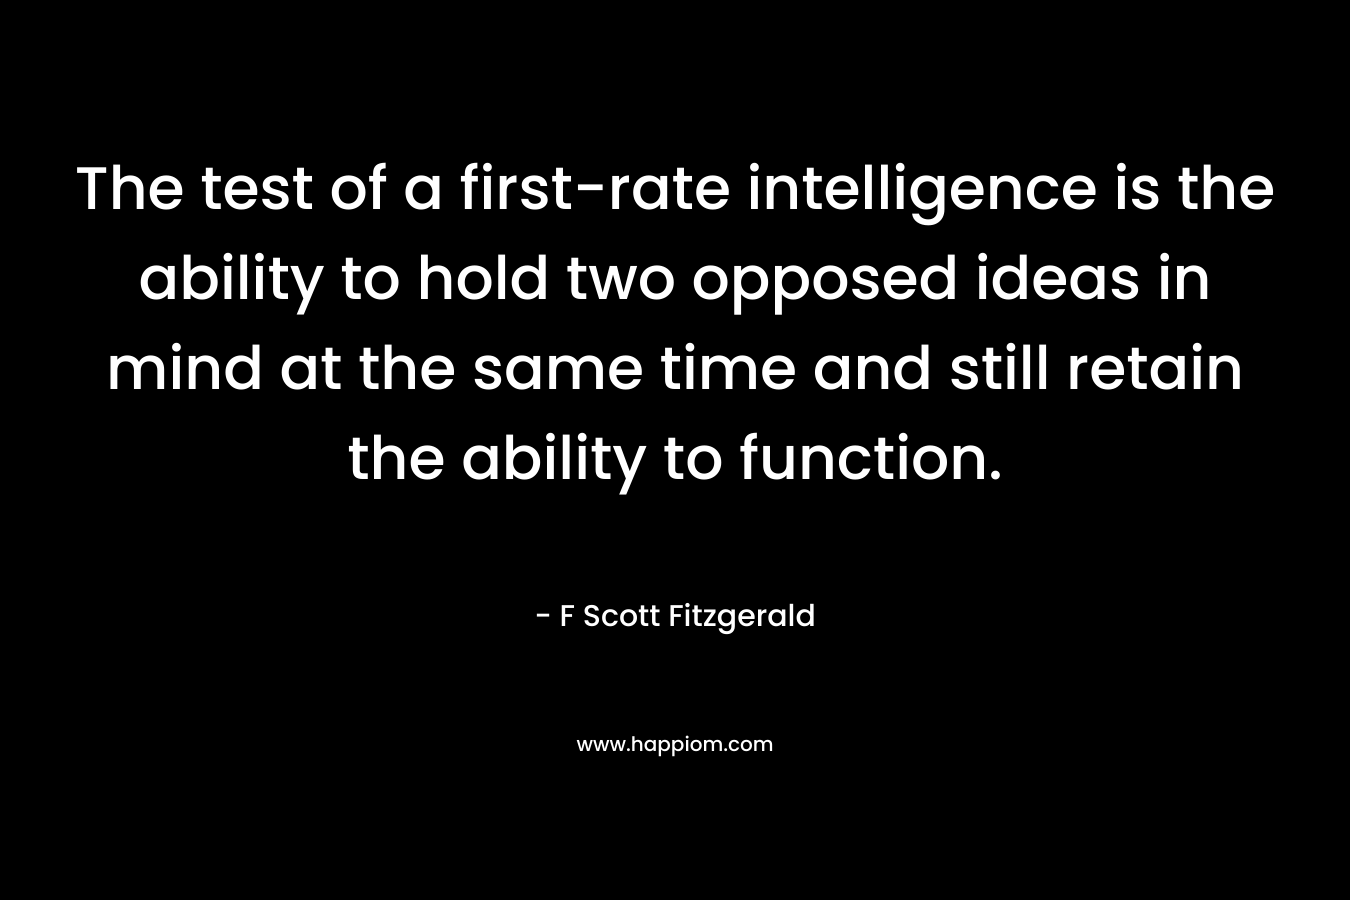 The test of a first-rate intelligence is the ability to hold two opposed ideas in mind at the same time and still retain the ability to function.